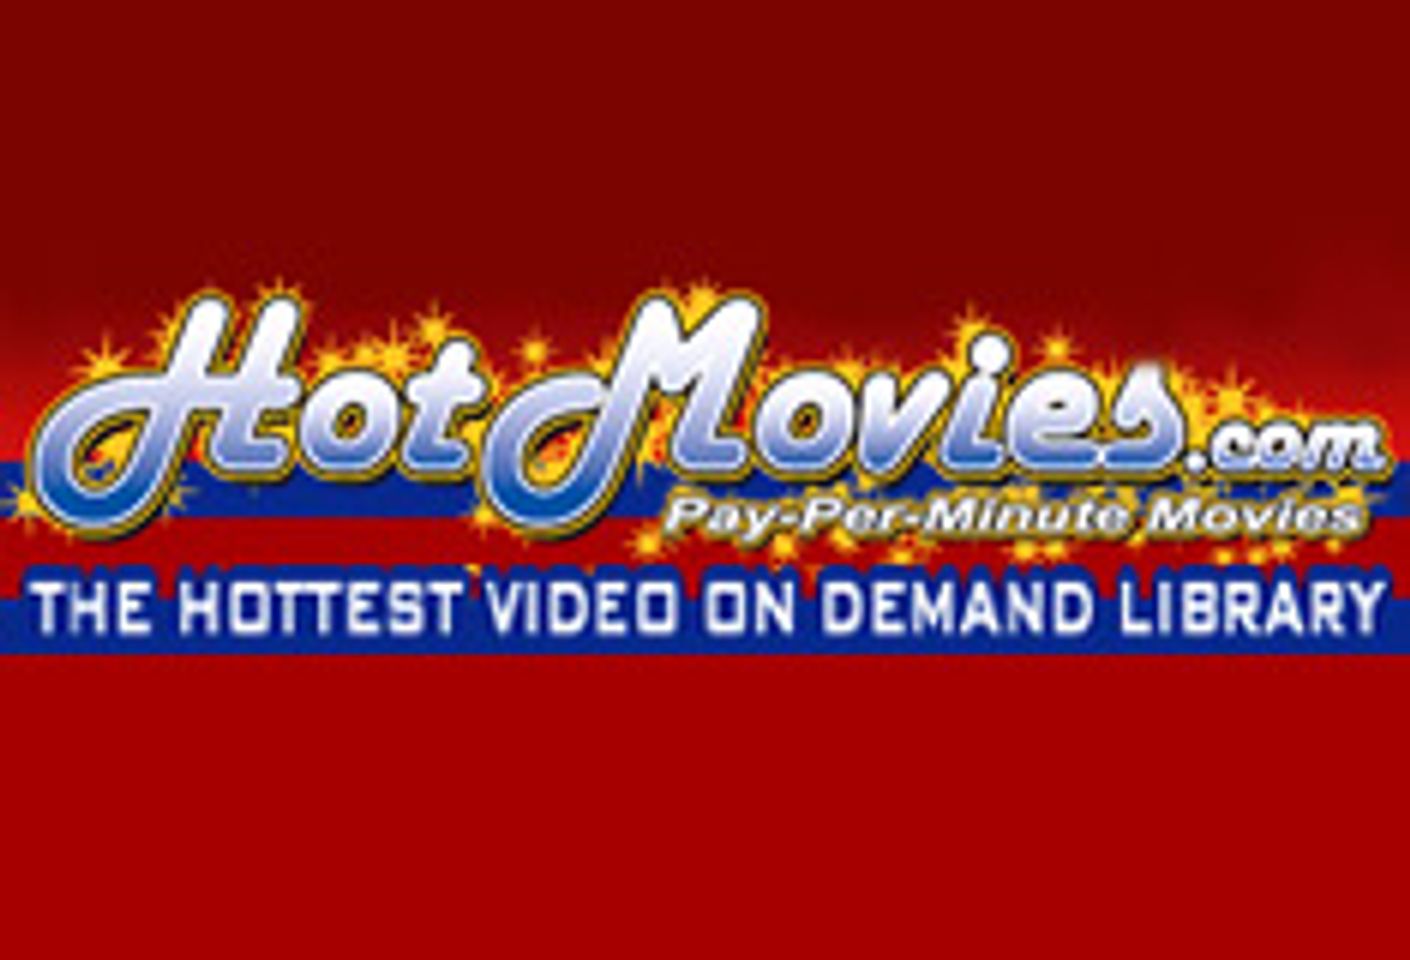 Hotmovies.com Launches Download-2-Own